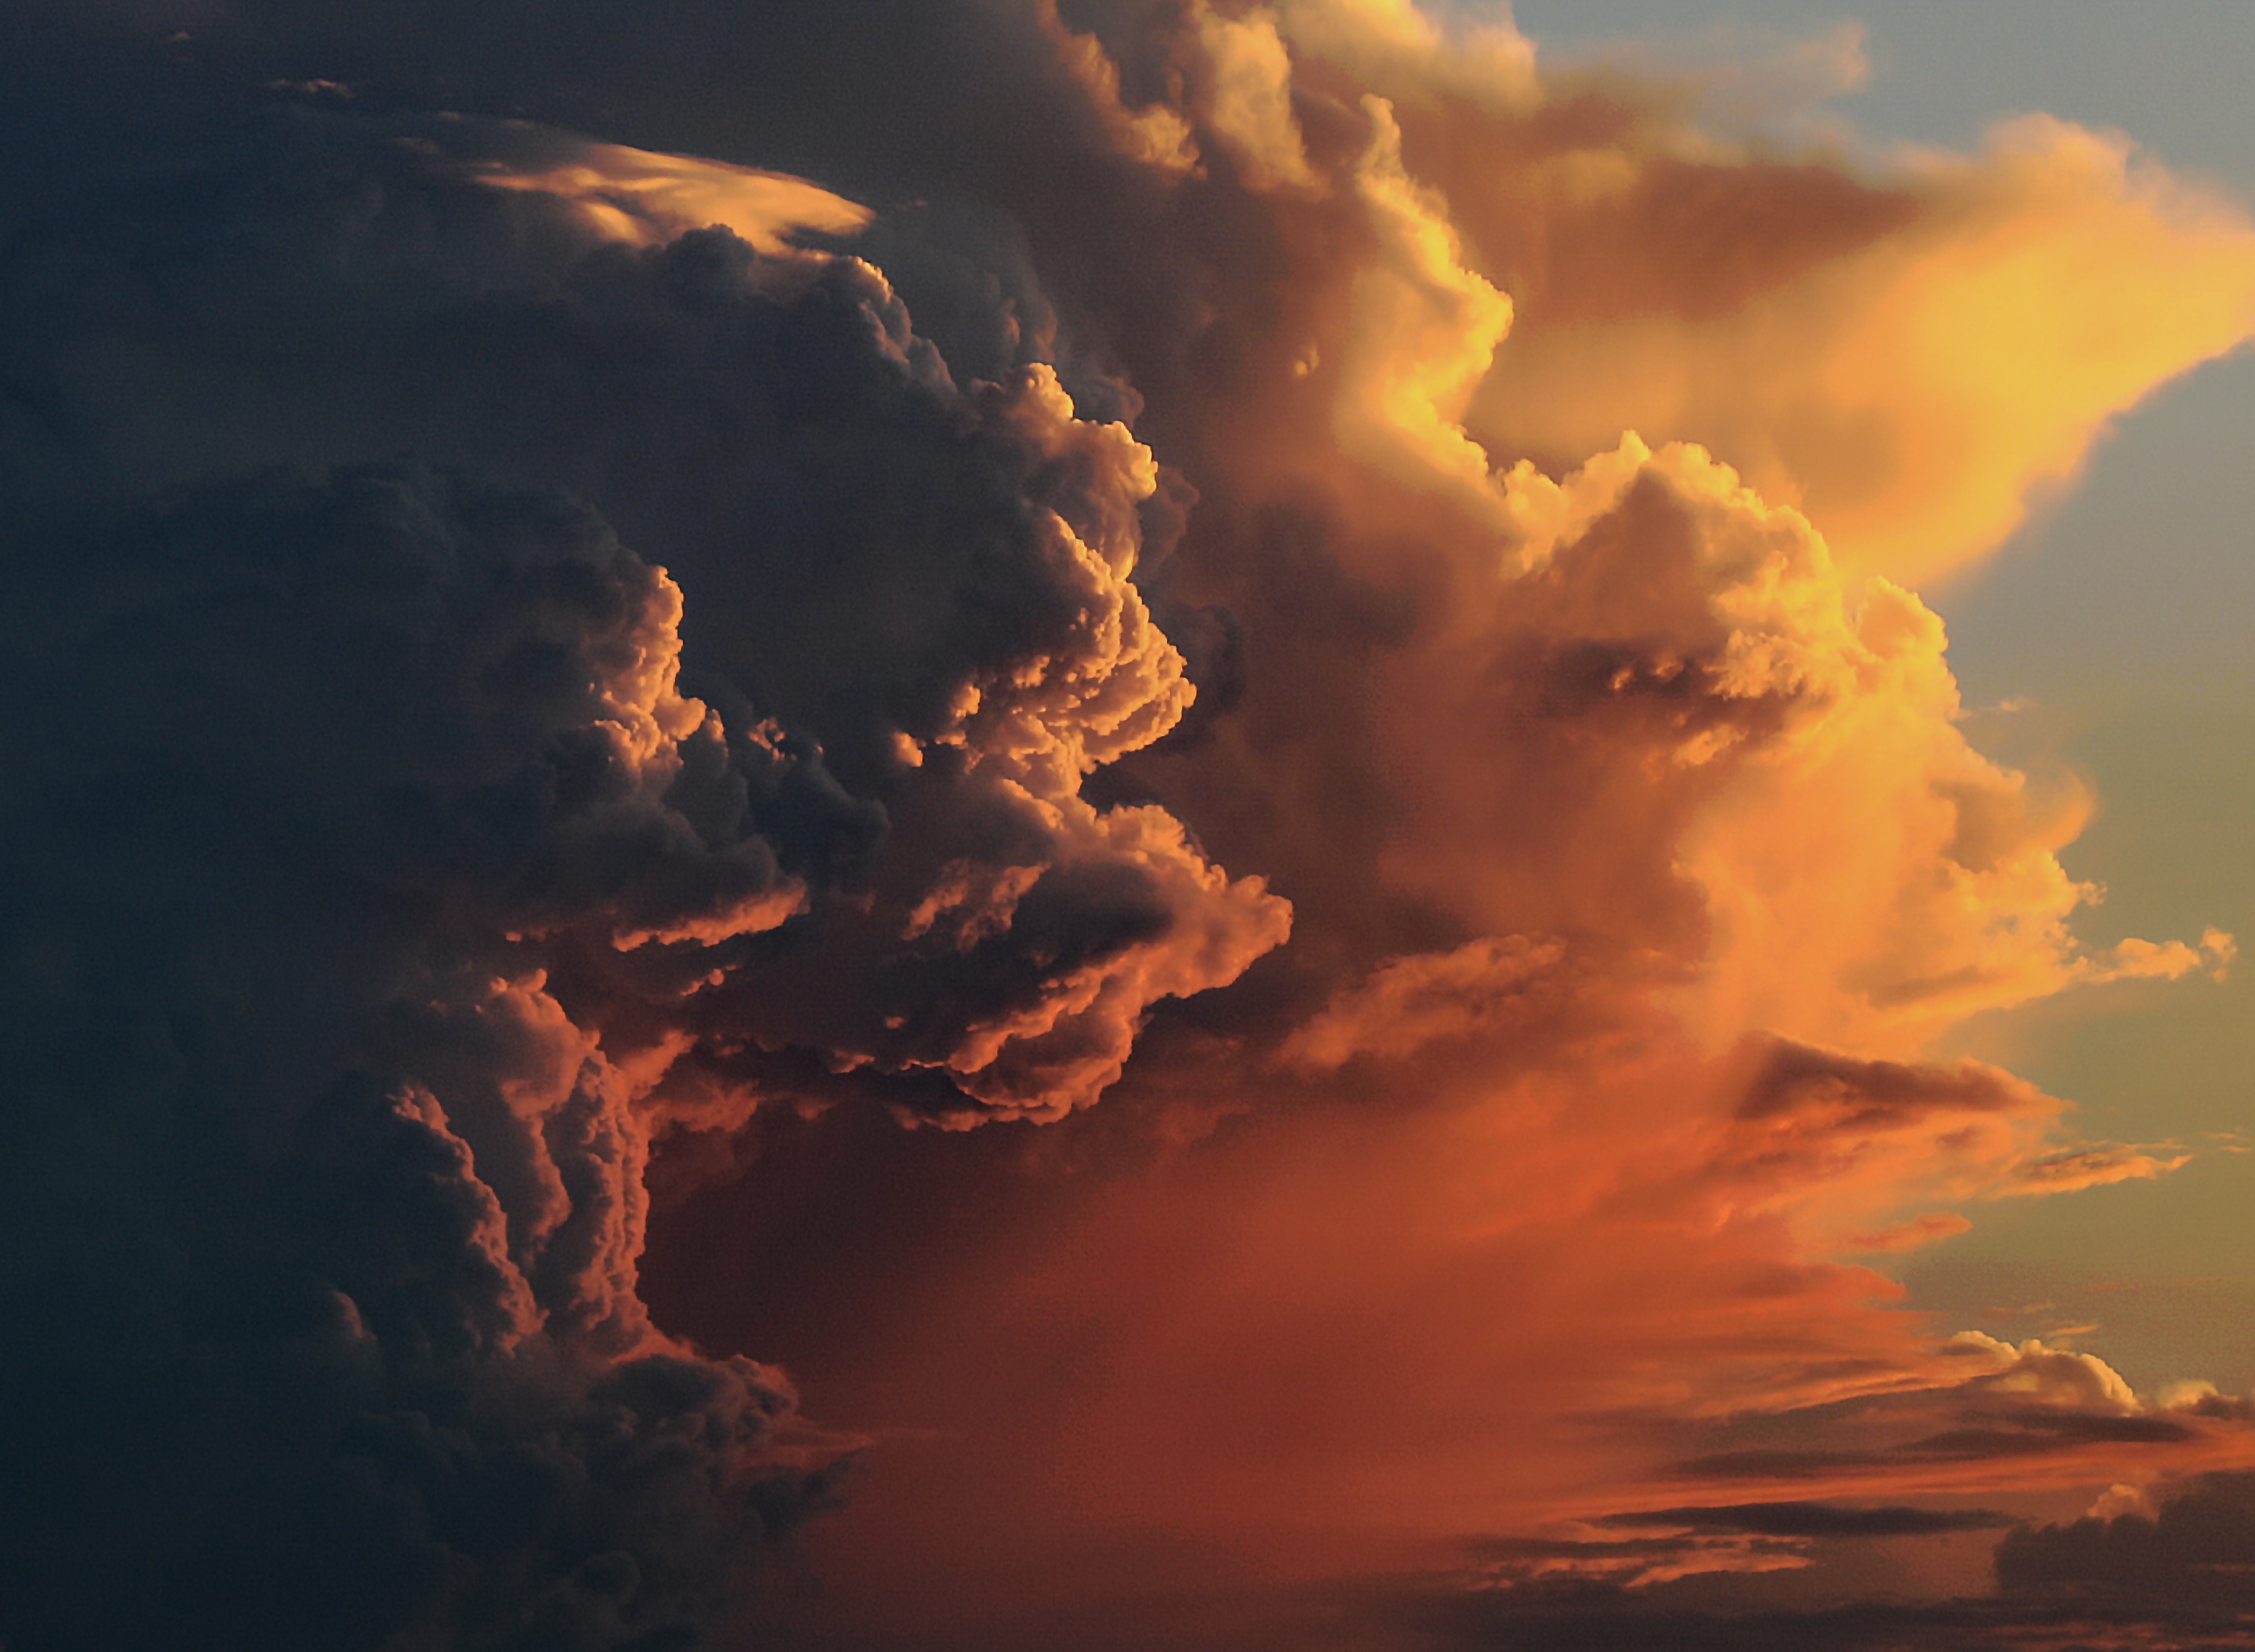 Thunderstorm Clouds At Sunset - HD Wallpaper 